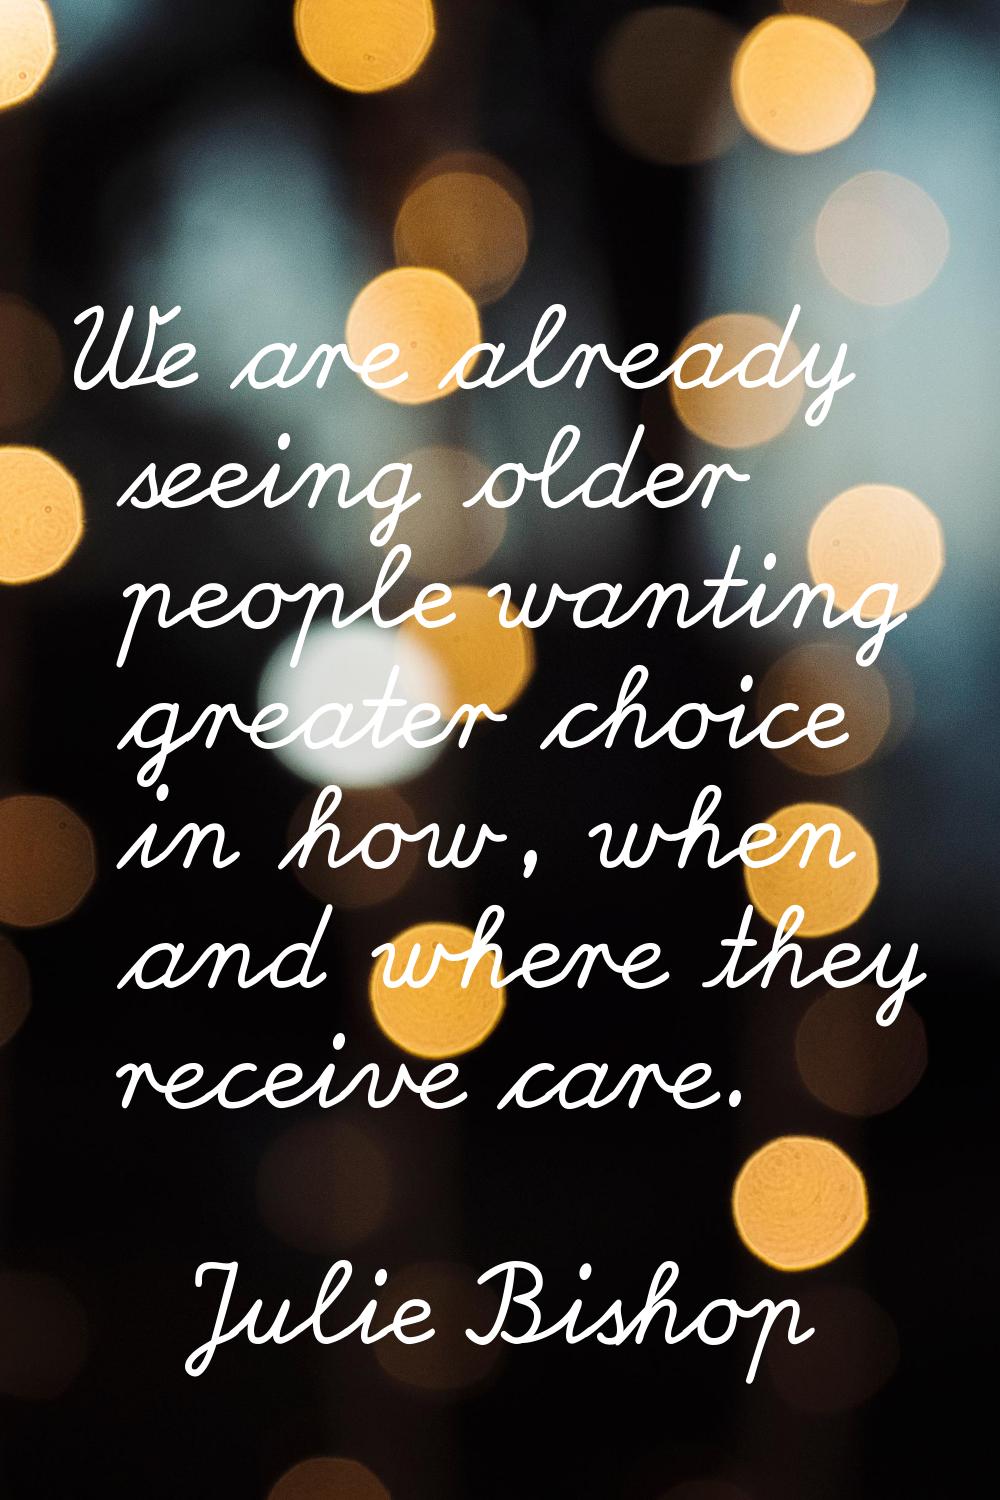 We are already seeing older people wanting greater choice in how, when and where they receive care.